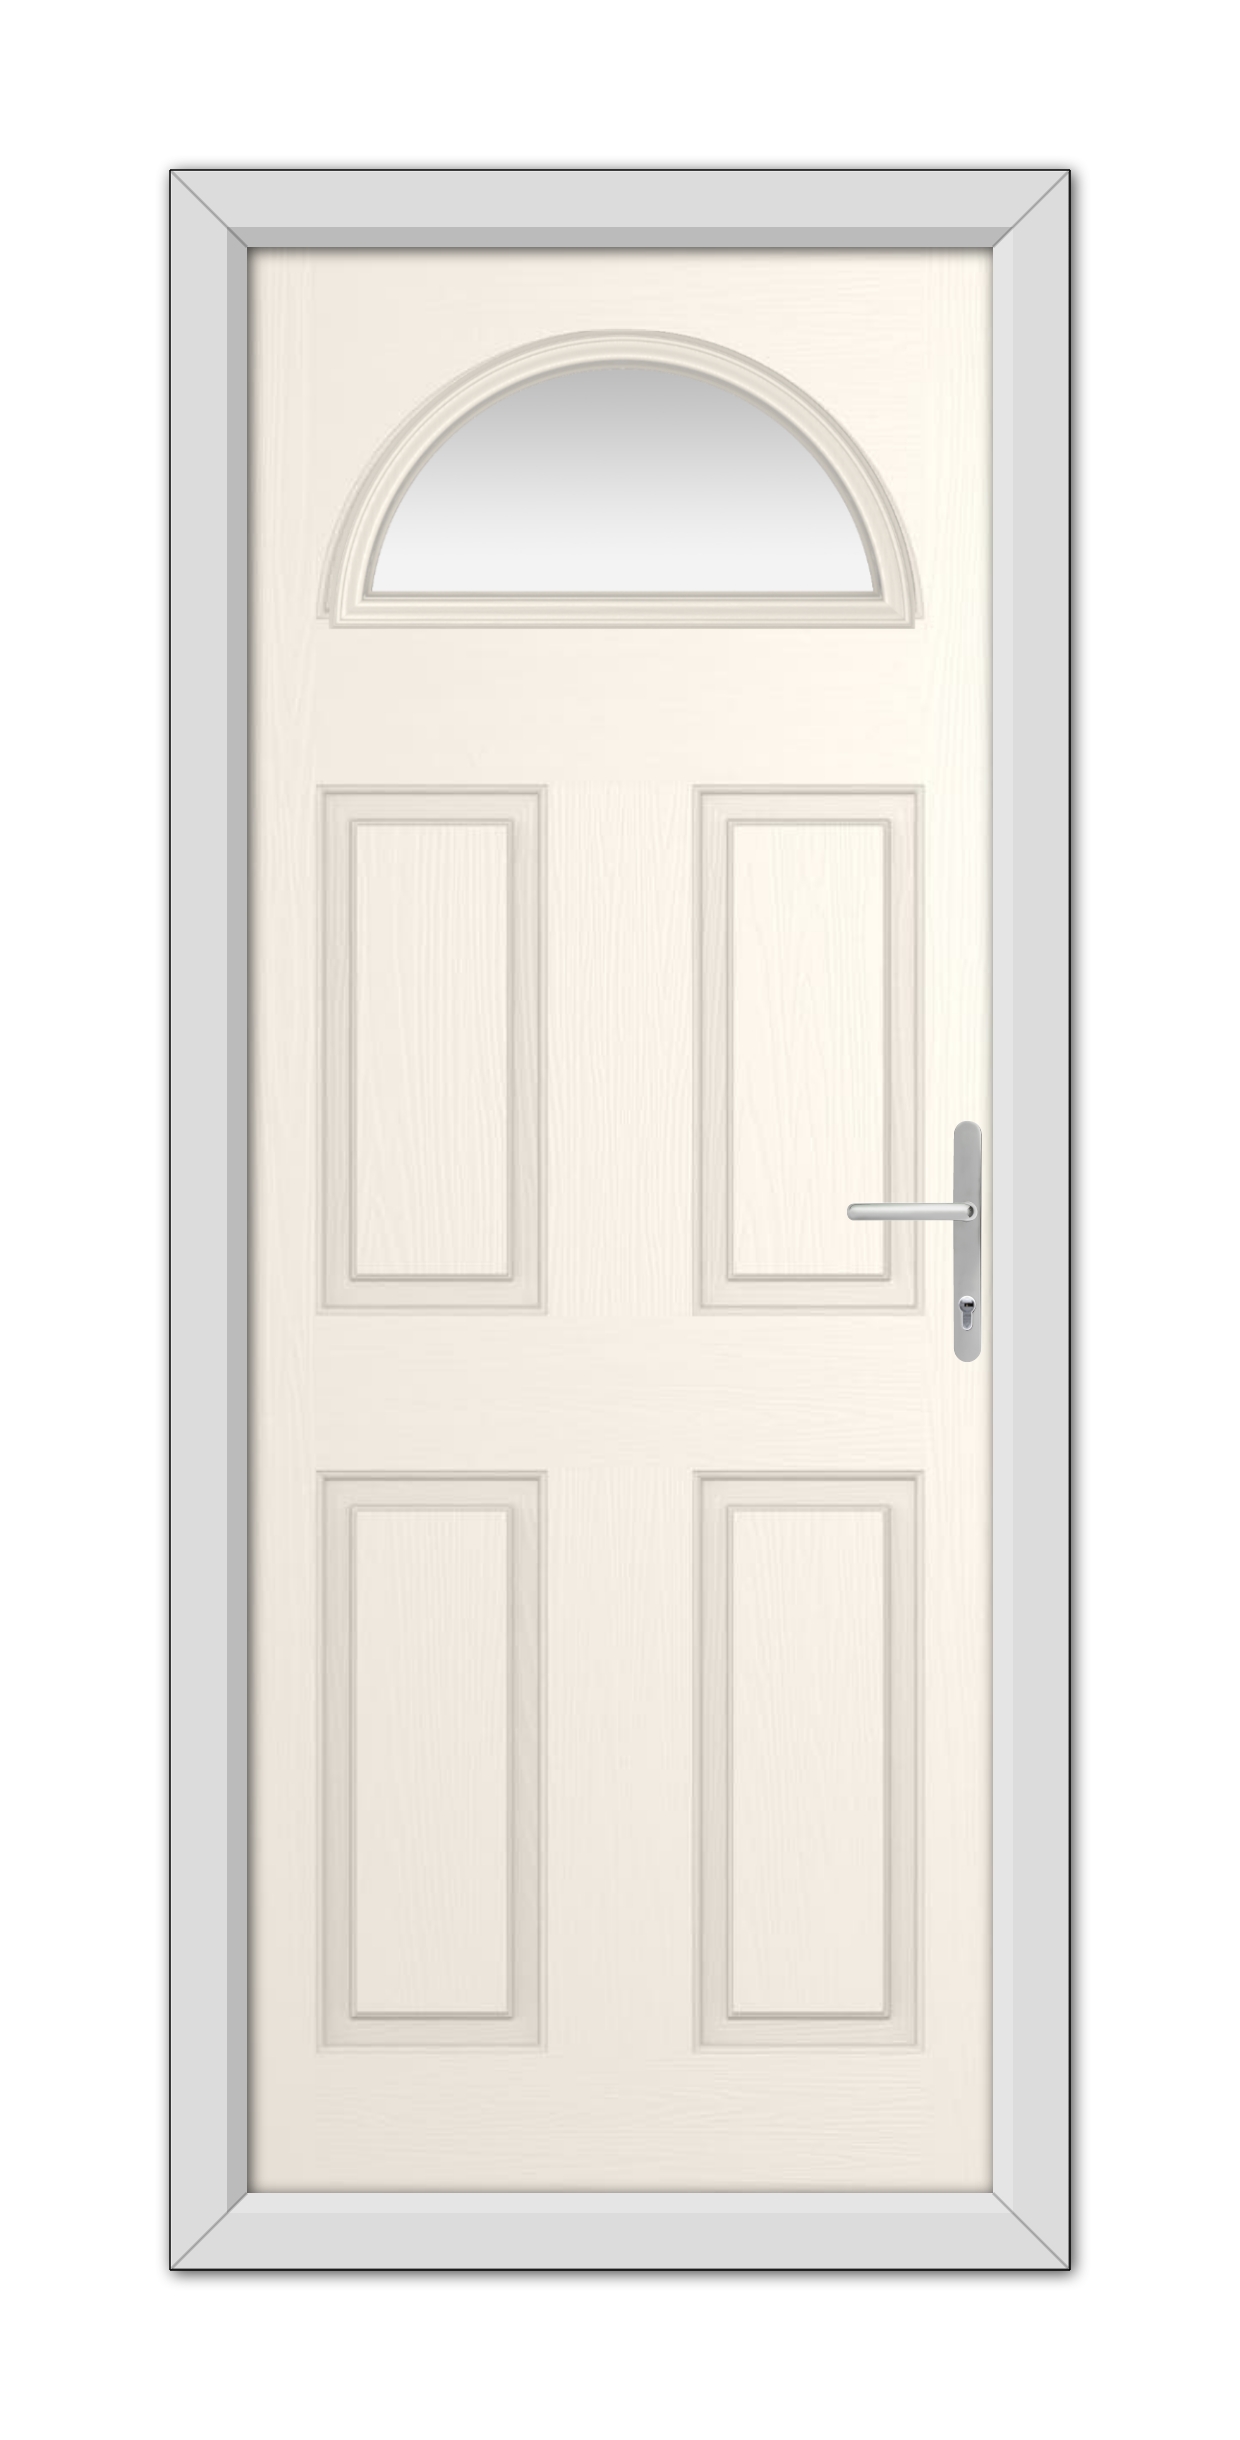 A White Foil Winslow 1 Composite Door 48mm Timber Core with an arched window at the top and a metallic handle, set within a grey frame.